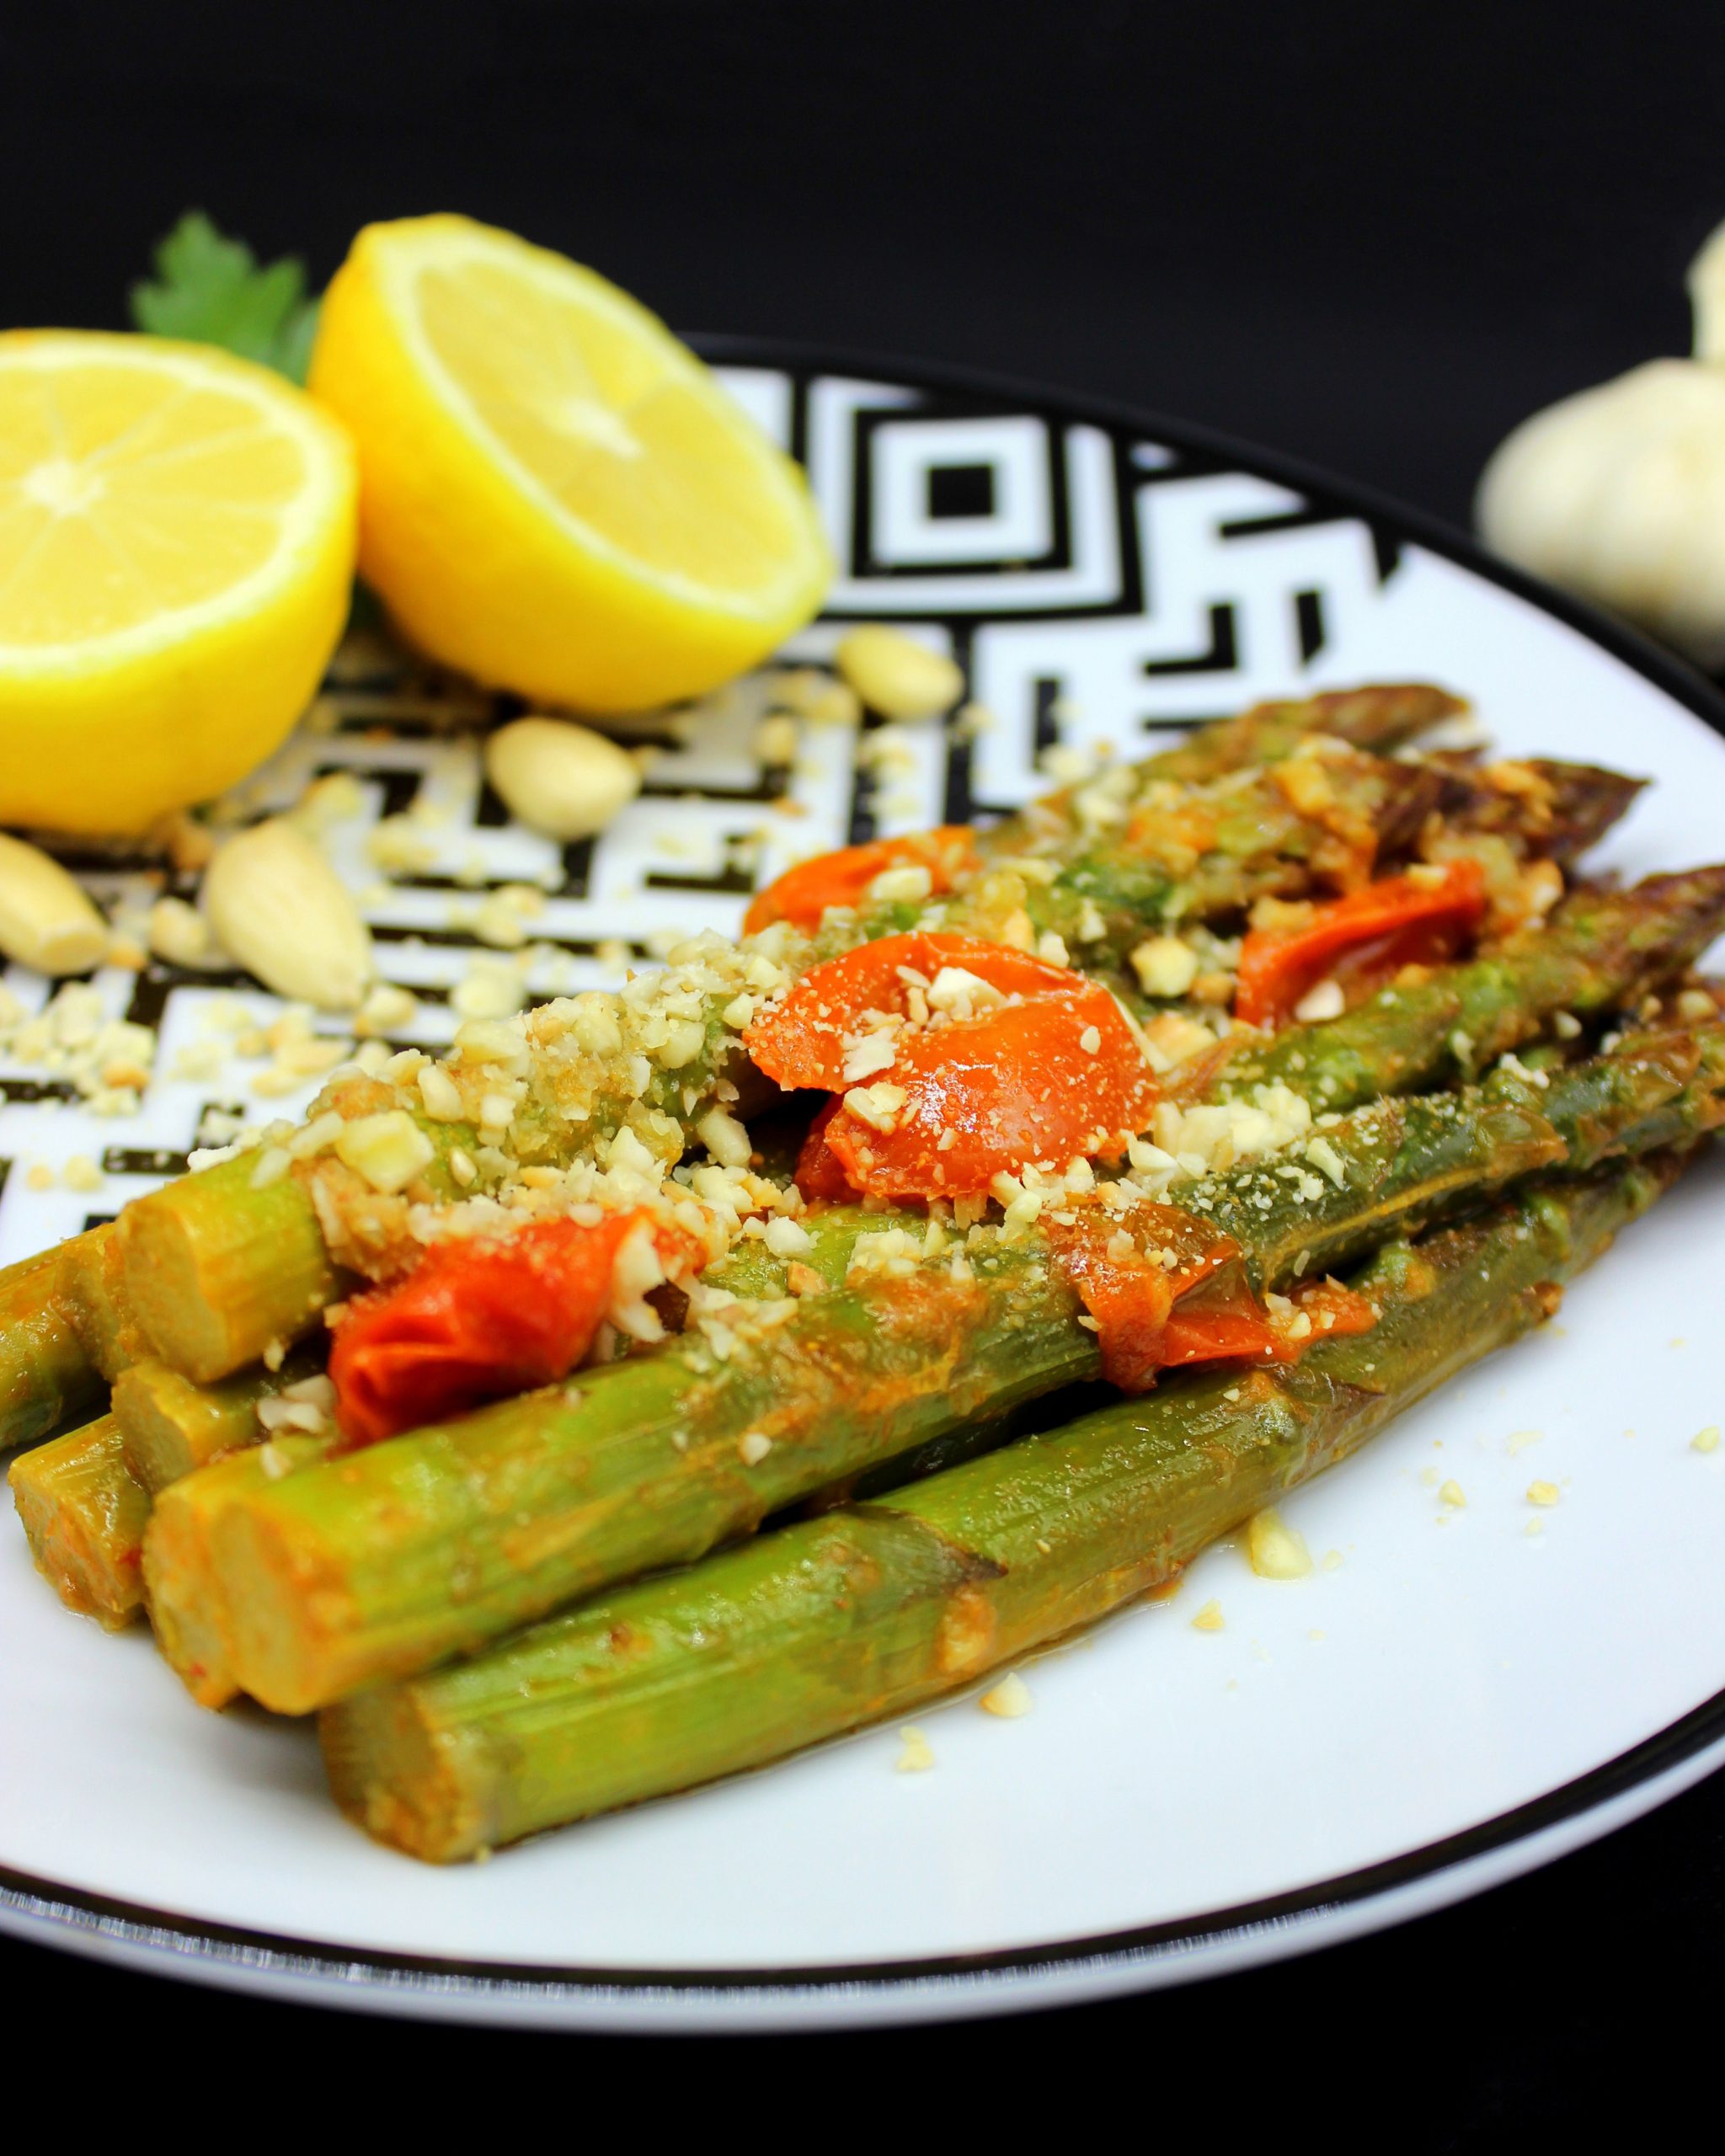 Asparagus with garlic and almonds